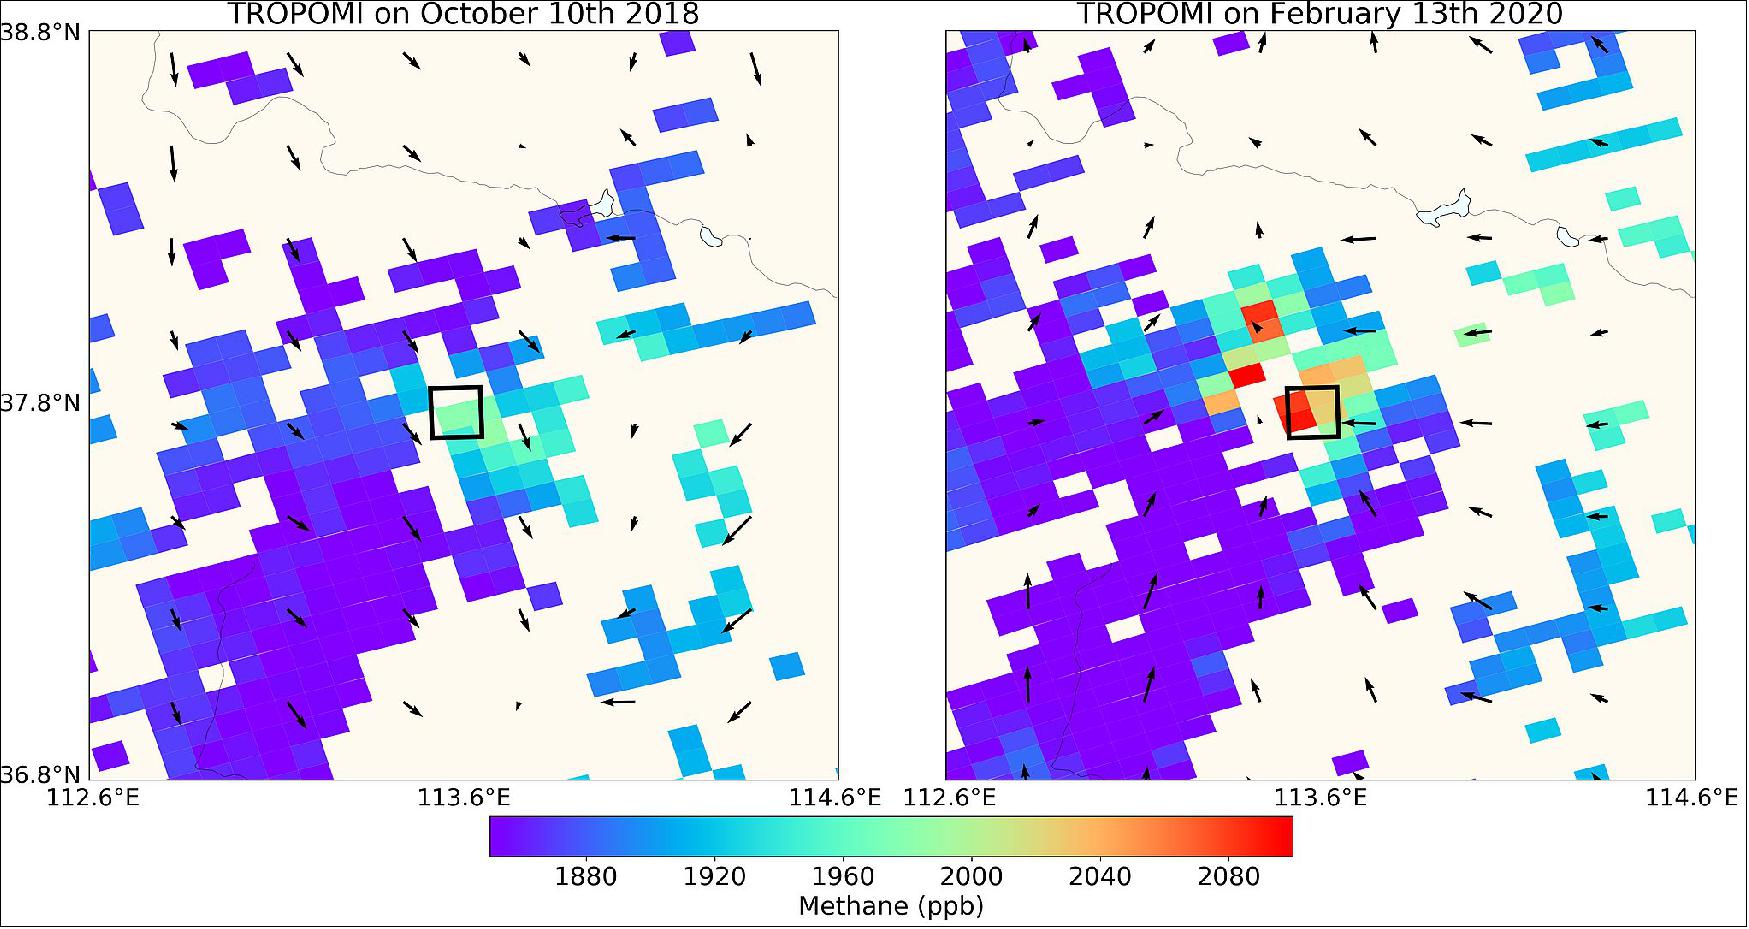 Figure 5: TROPOMI methane measurements over a coal mine in the Shanxi province, China. GHGSat have worked in close collaboration with the Sentinel-5P team at SRON Netherlands Institute for Space Research to investigate hotspots of methane emissions. The team uses data from the Copernicus Sentinel-5P satellite to detect emissions on a global scale, and then utilizes data from GHGSat satellites to quantify and attribute emission to specific facilities around the world. -This has led to several new hotspots being discovered including a coal mine in the Shanxi province, China (image credit: ESA, the image contains modified Copernicus Sentinel data (2018, 2020), processed by SRON)